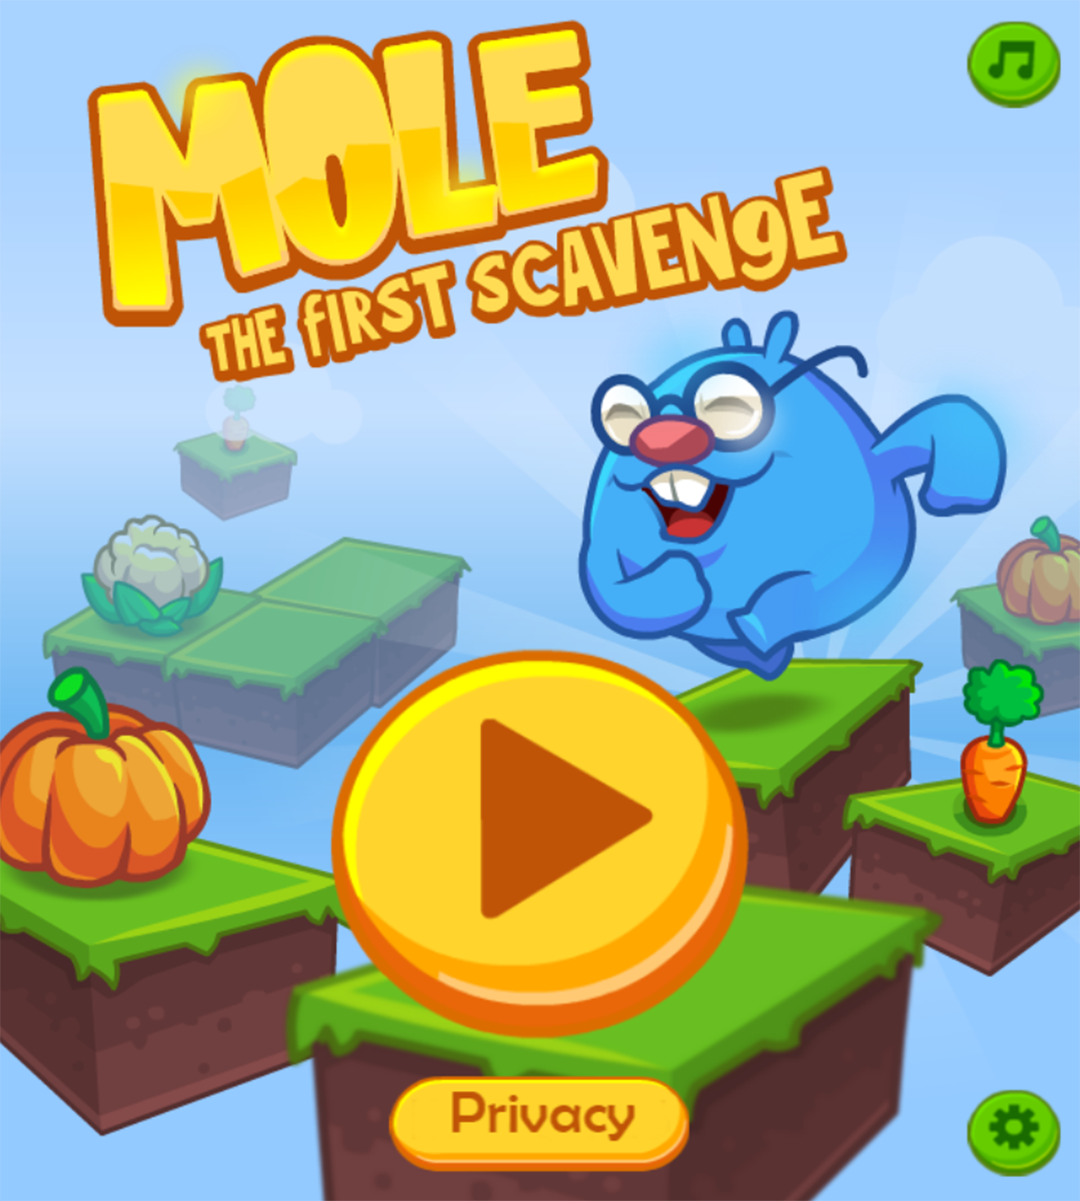 Screenshot 1 of Happy mouse 1.0.2